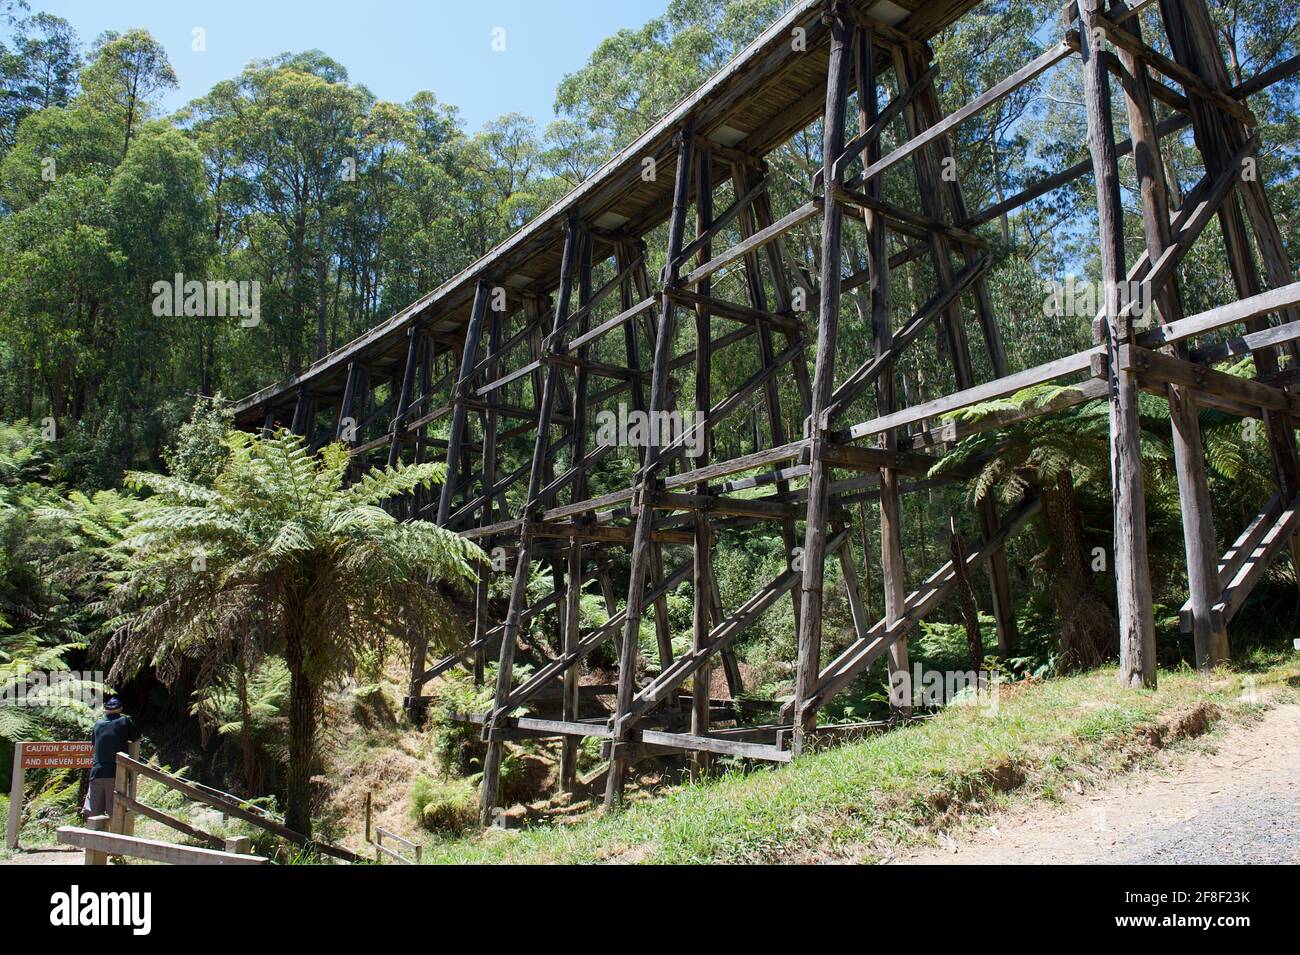 The Noojee trestle bridge was built to carry the railway across a steep gully. The trains made the trip to Warrigal take a few hours not days by road. Stock Photo